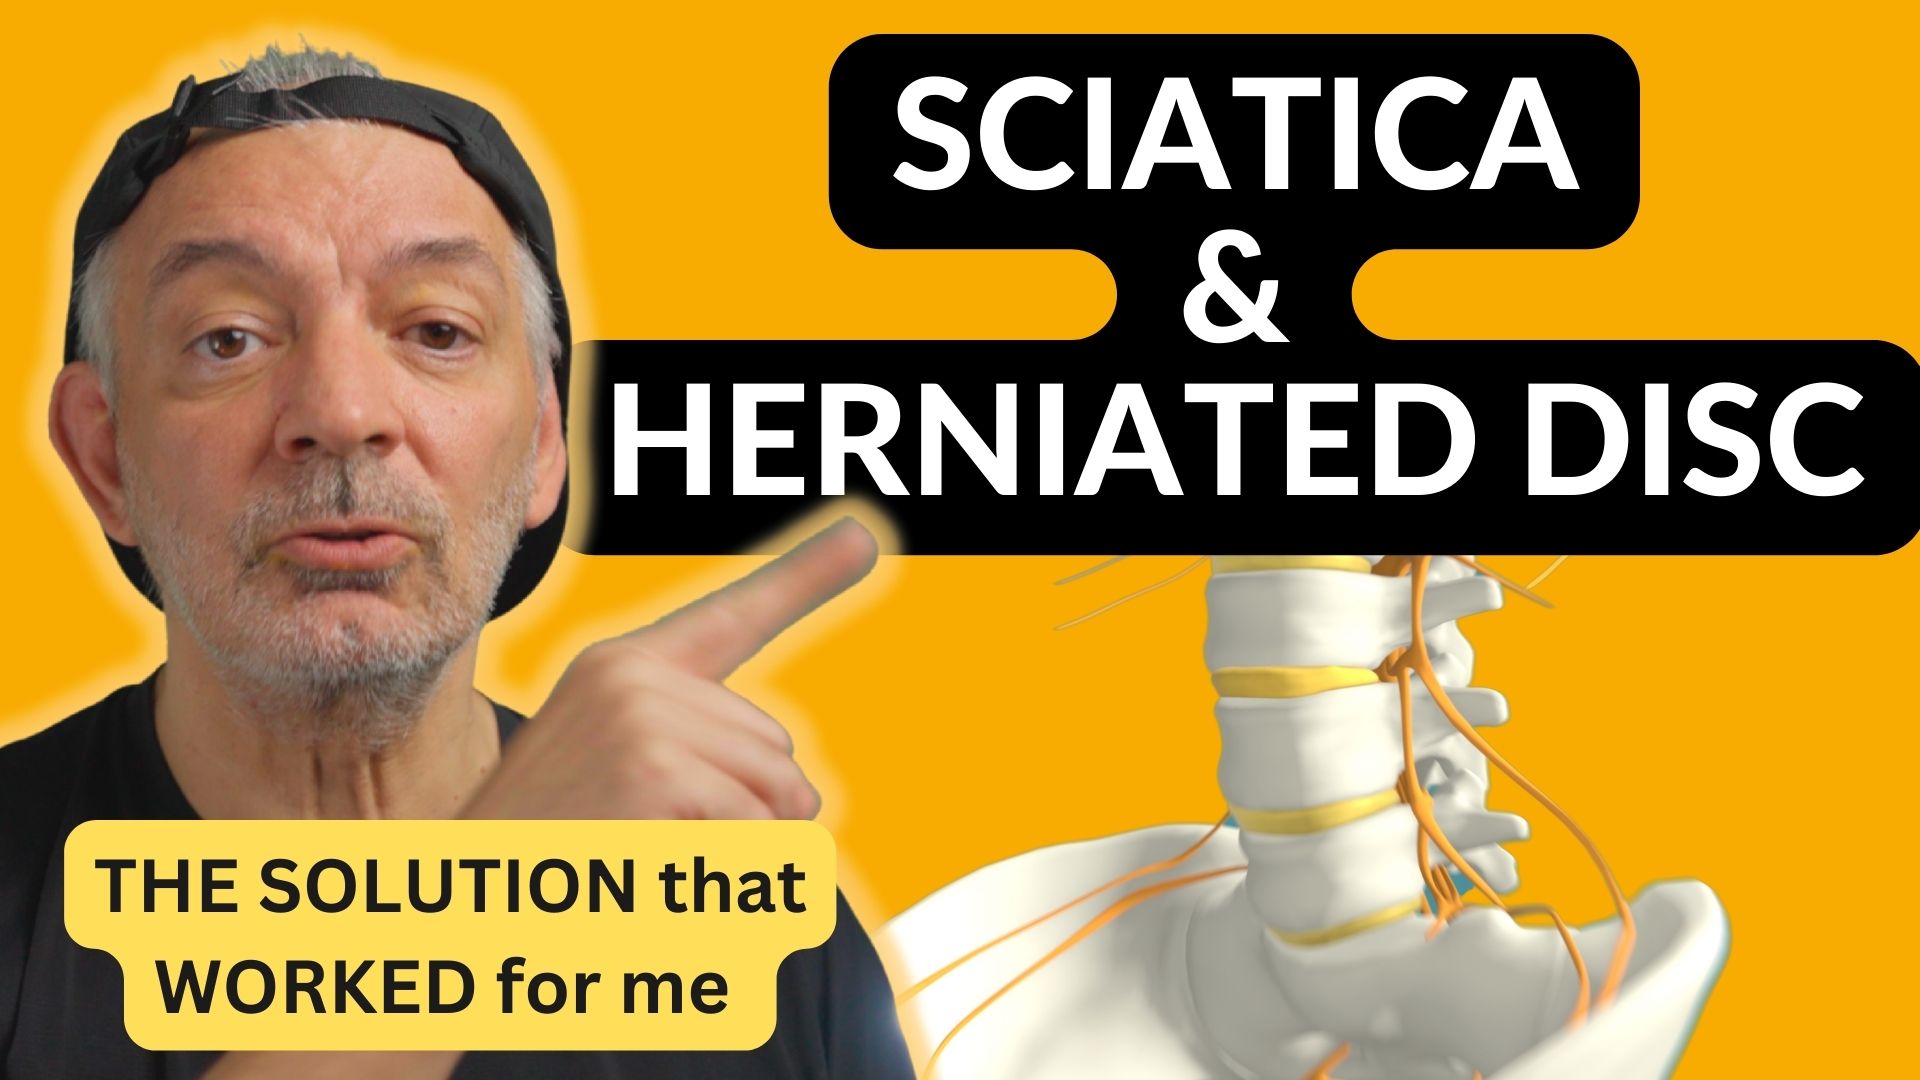 sciatica herniated disc: the solution that worked for me